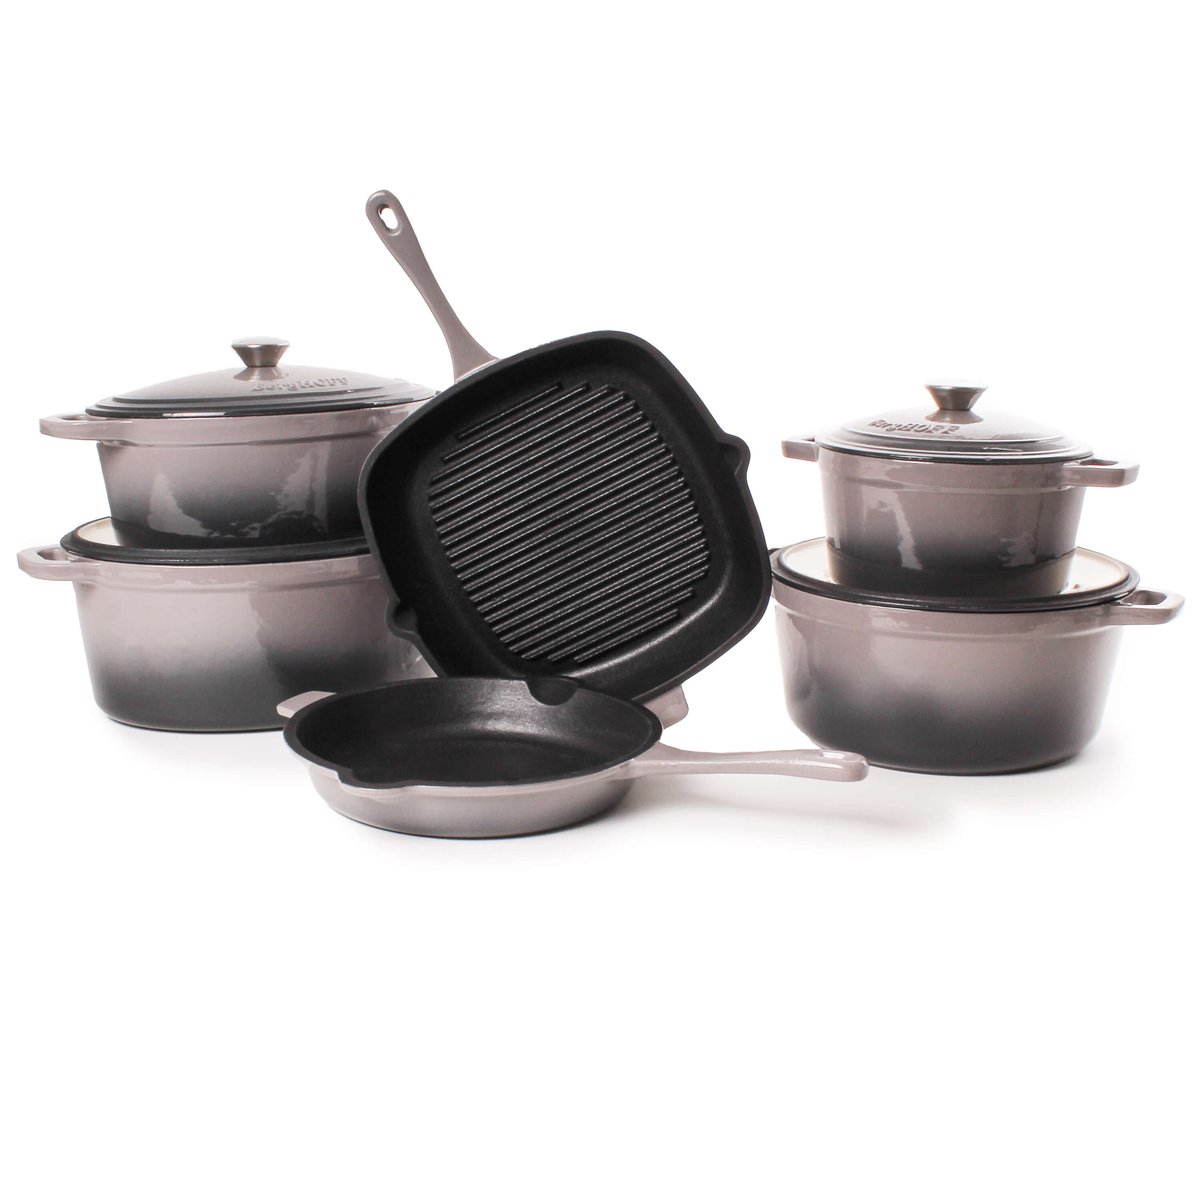 https://images.verishop.com/berghoff-neo-11-cast-iron-square-grill-pan-oyster/M05413821338064-2958868792?auto=format&cs=strip&fit=max&w=1200